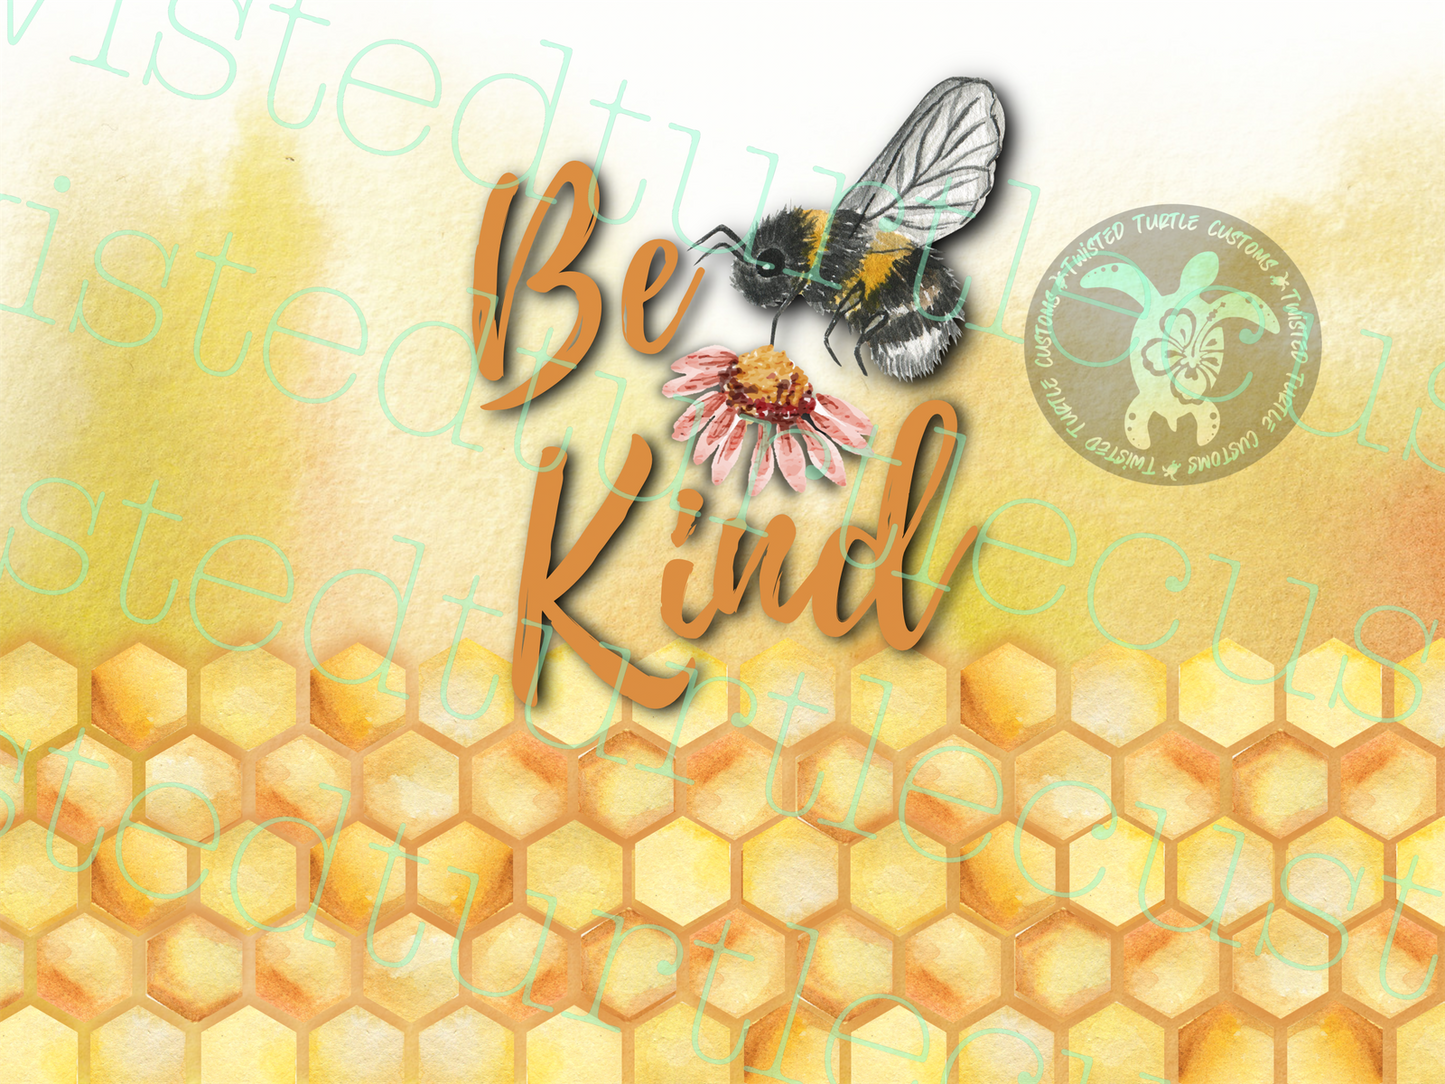 Be Kind 20oz Tumbler with Fuzzy Bee, Flower and Honeycomb